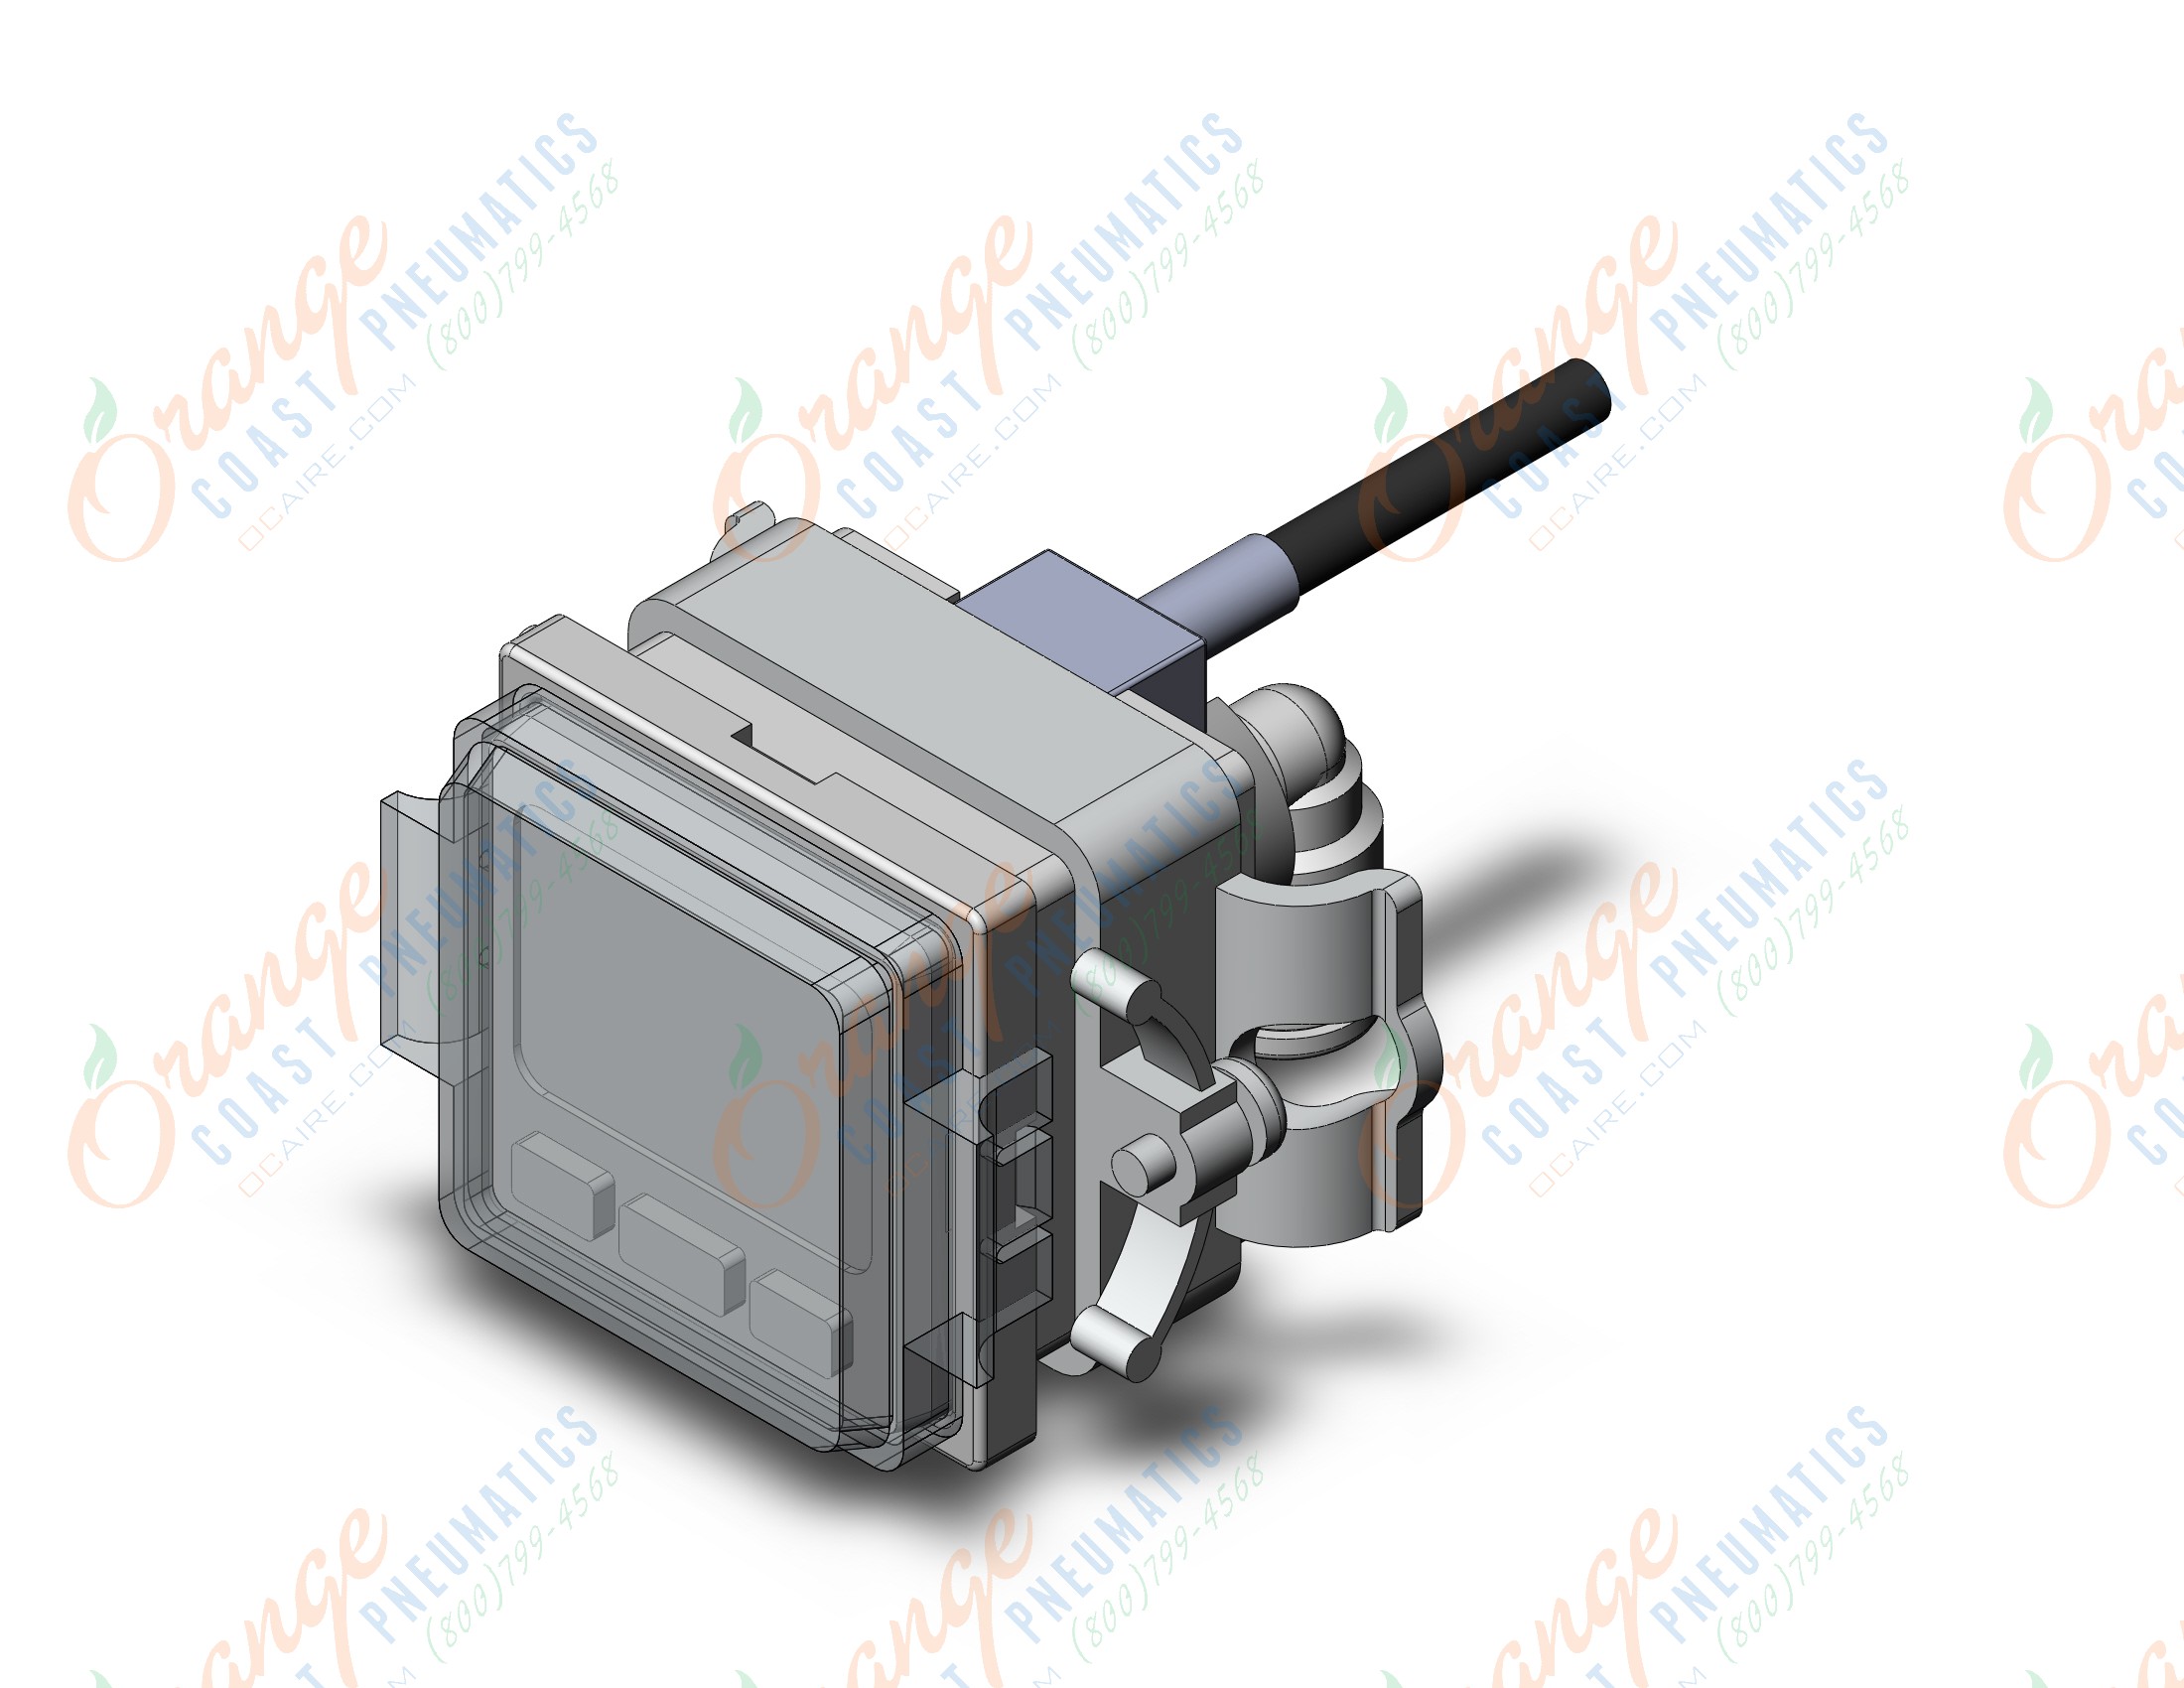 SMC ISE30A-C6L-B-GD-X510 2 color high precision dig pres switch, PRESSURE SWITCH, ISE30, ISE30A